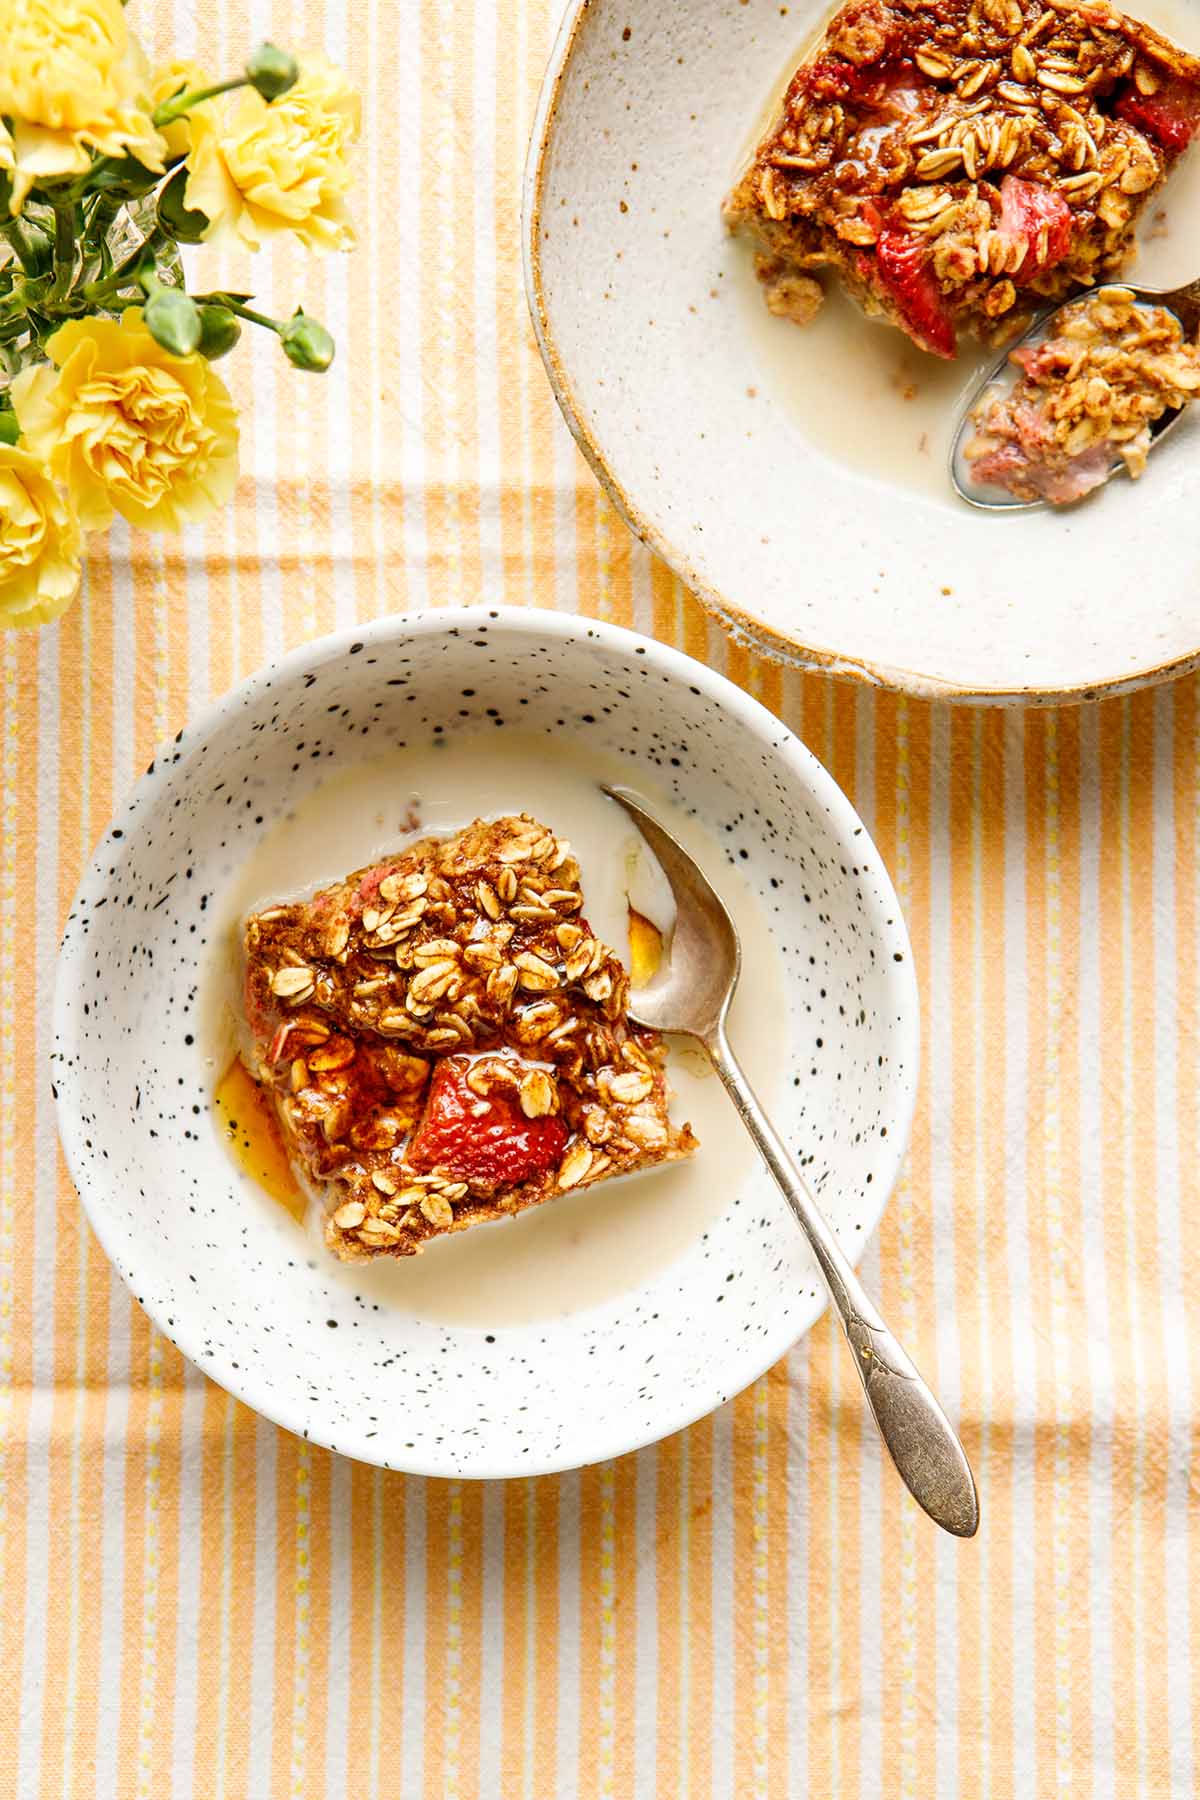 Two servings of vegan strawberry baked oatmeal in bowls on an orange striped tablecloth with a vase of yellow carnations nearby.